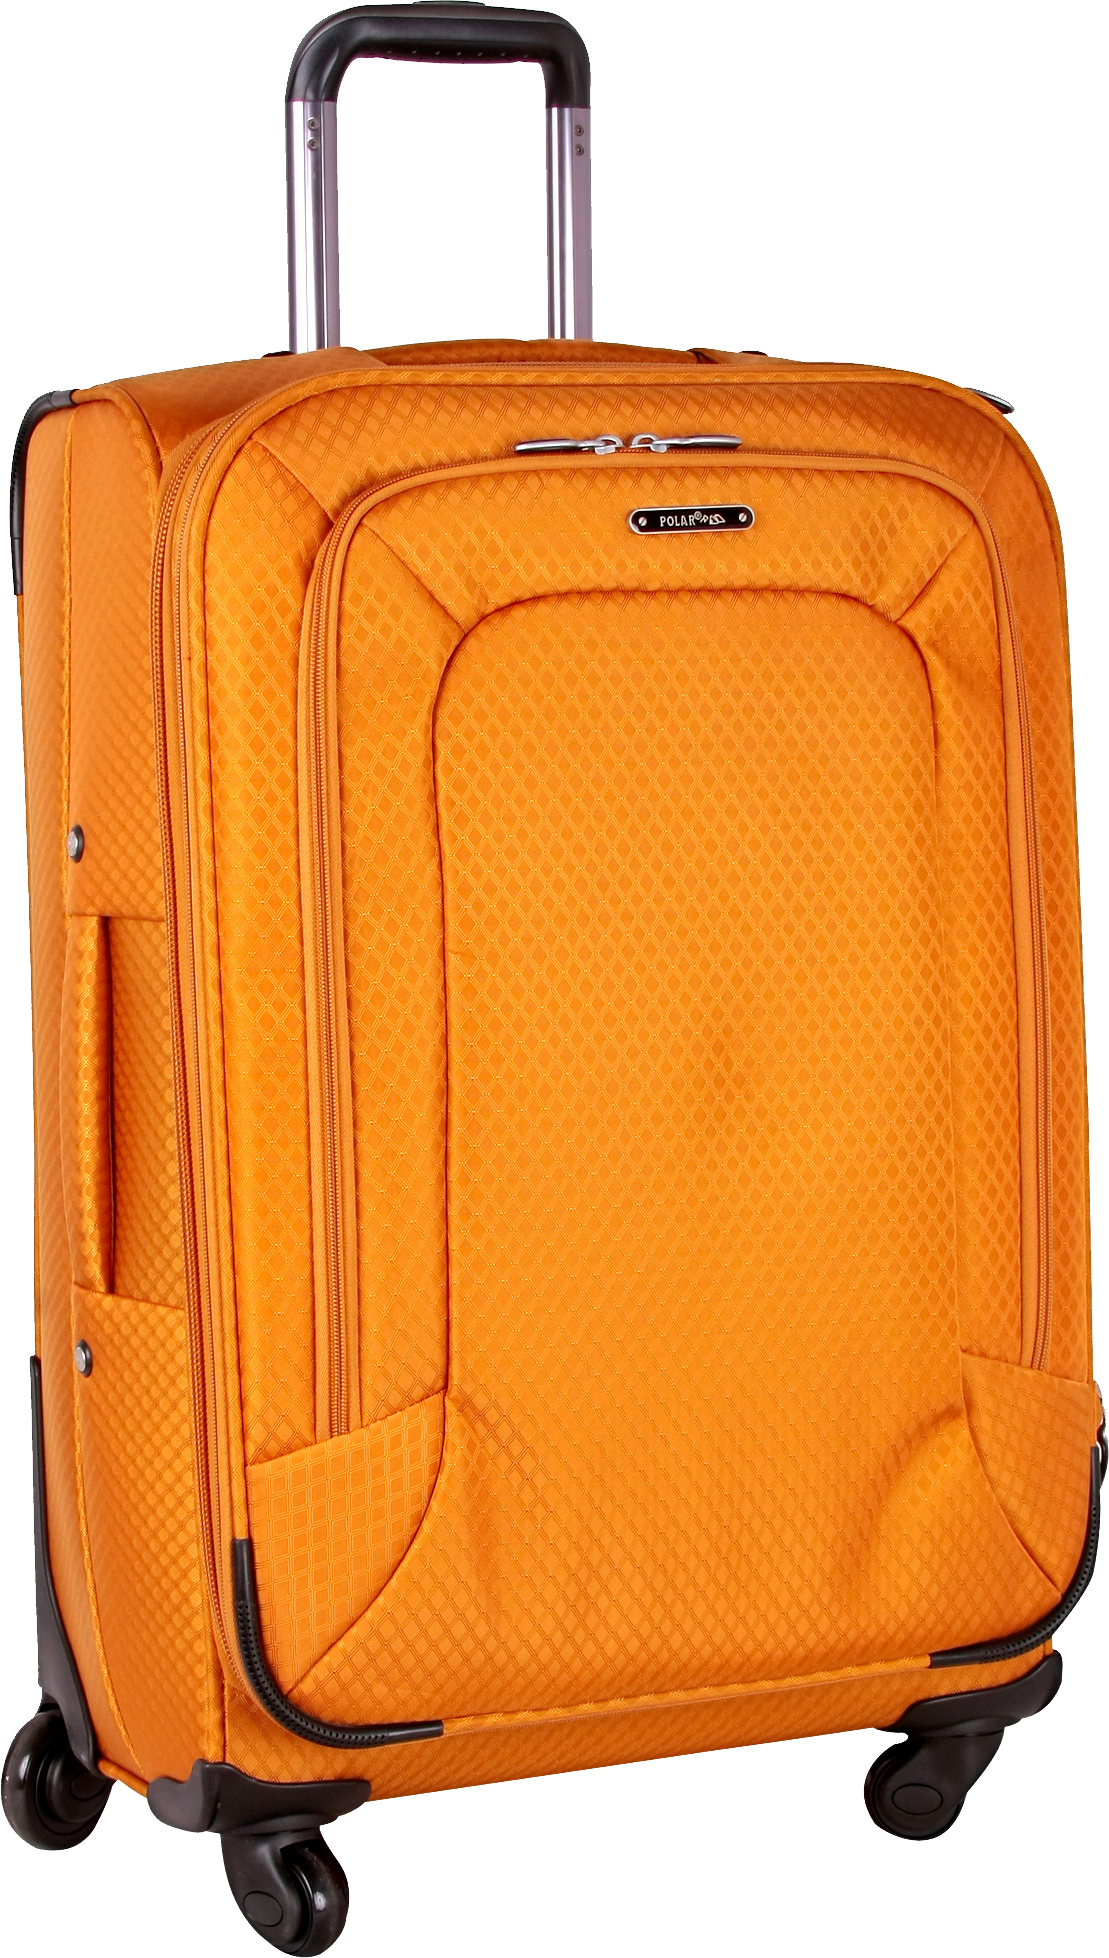 Yellow Suitcase PNG Image